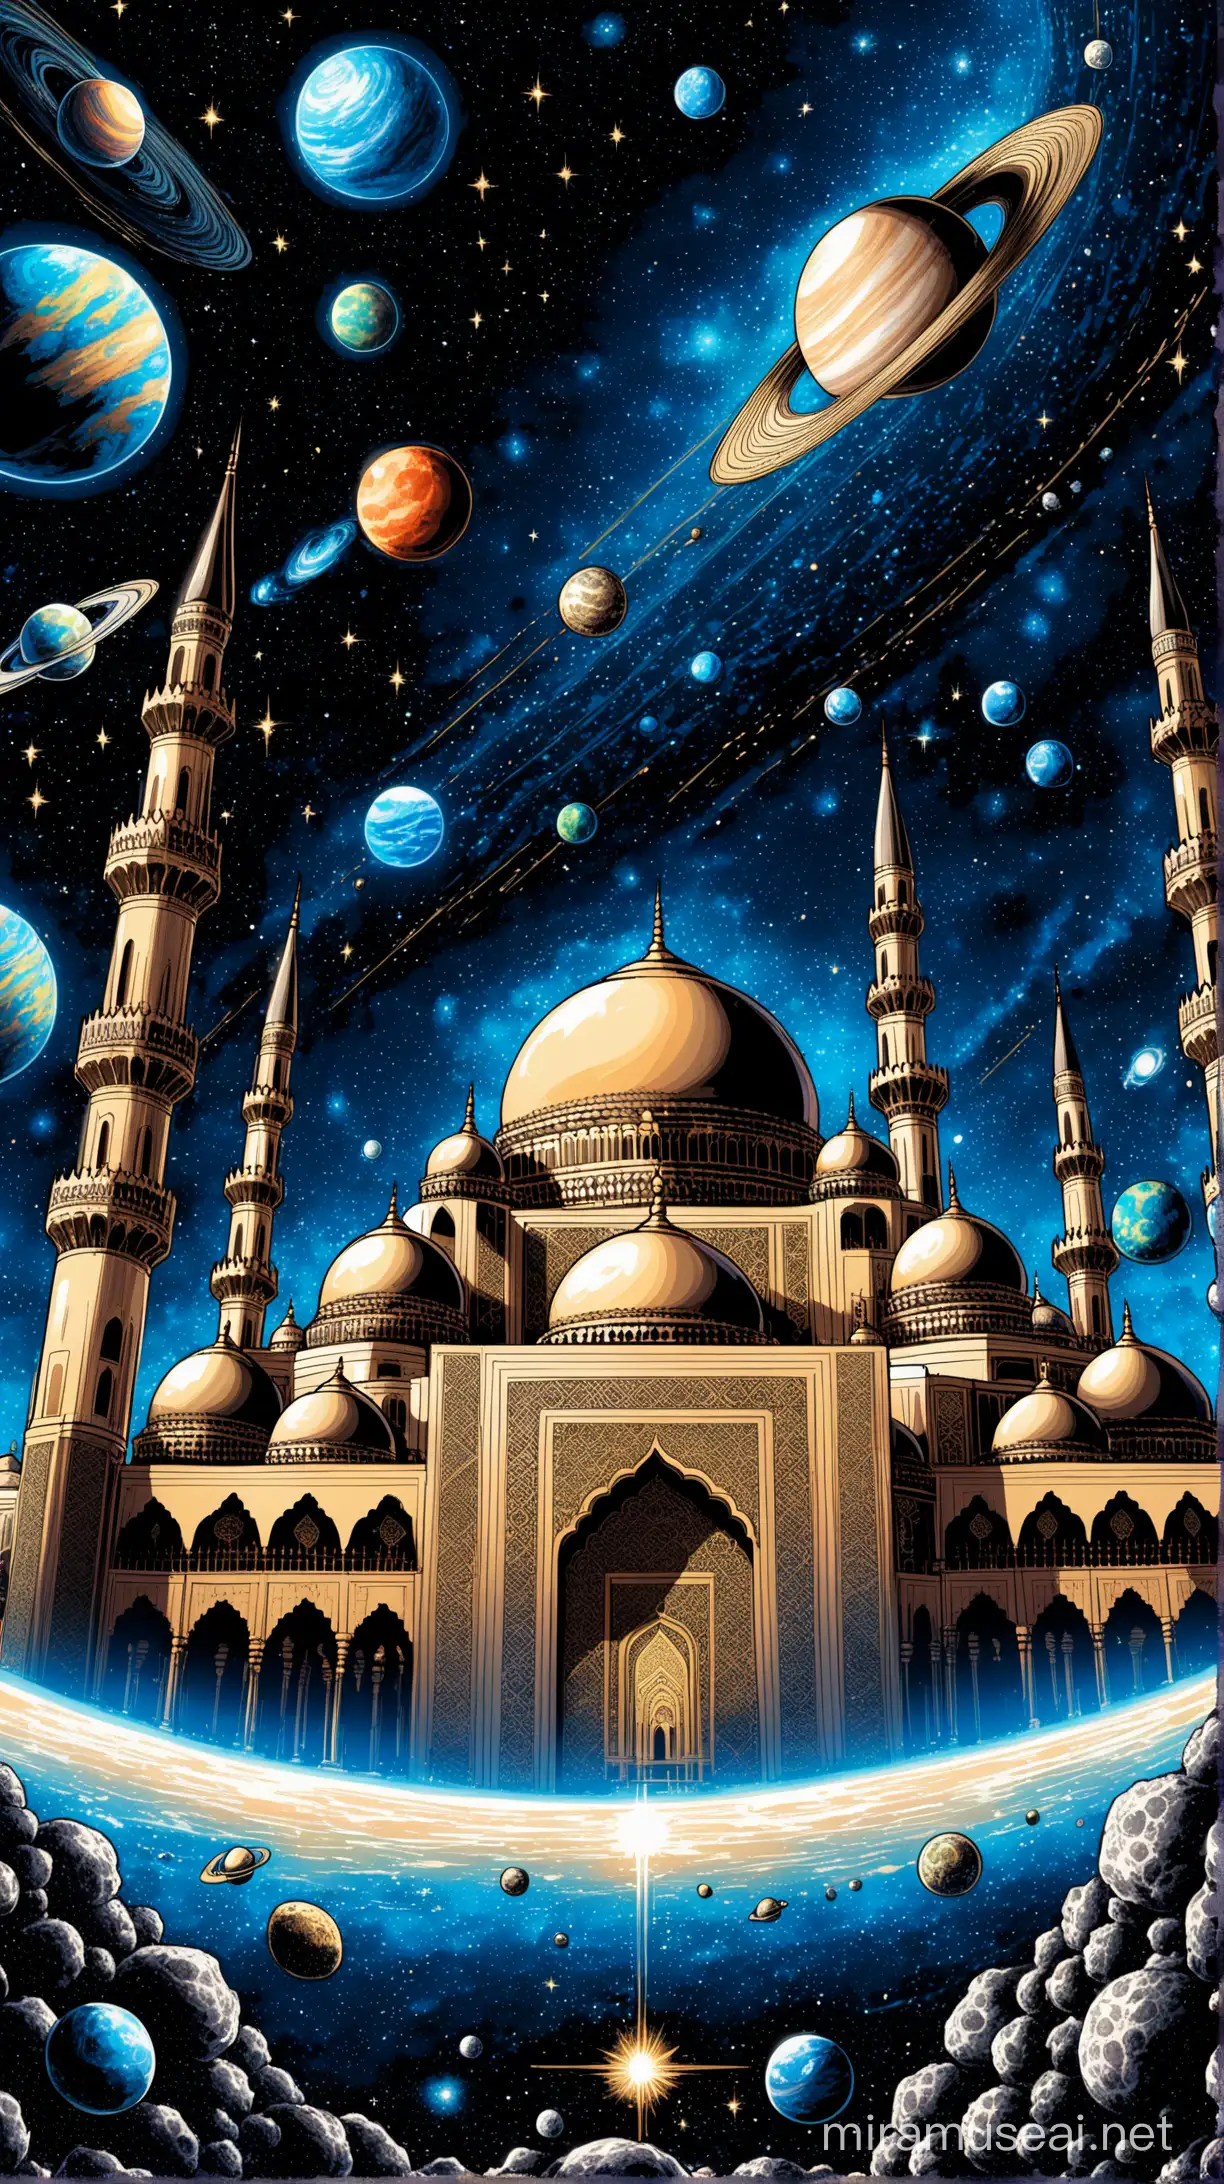 Cosmic Mosque Intricate Details Interwoven with Asteroids and Planets